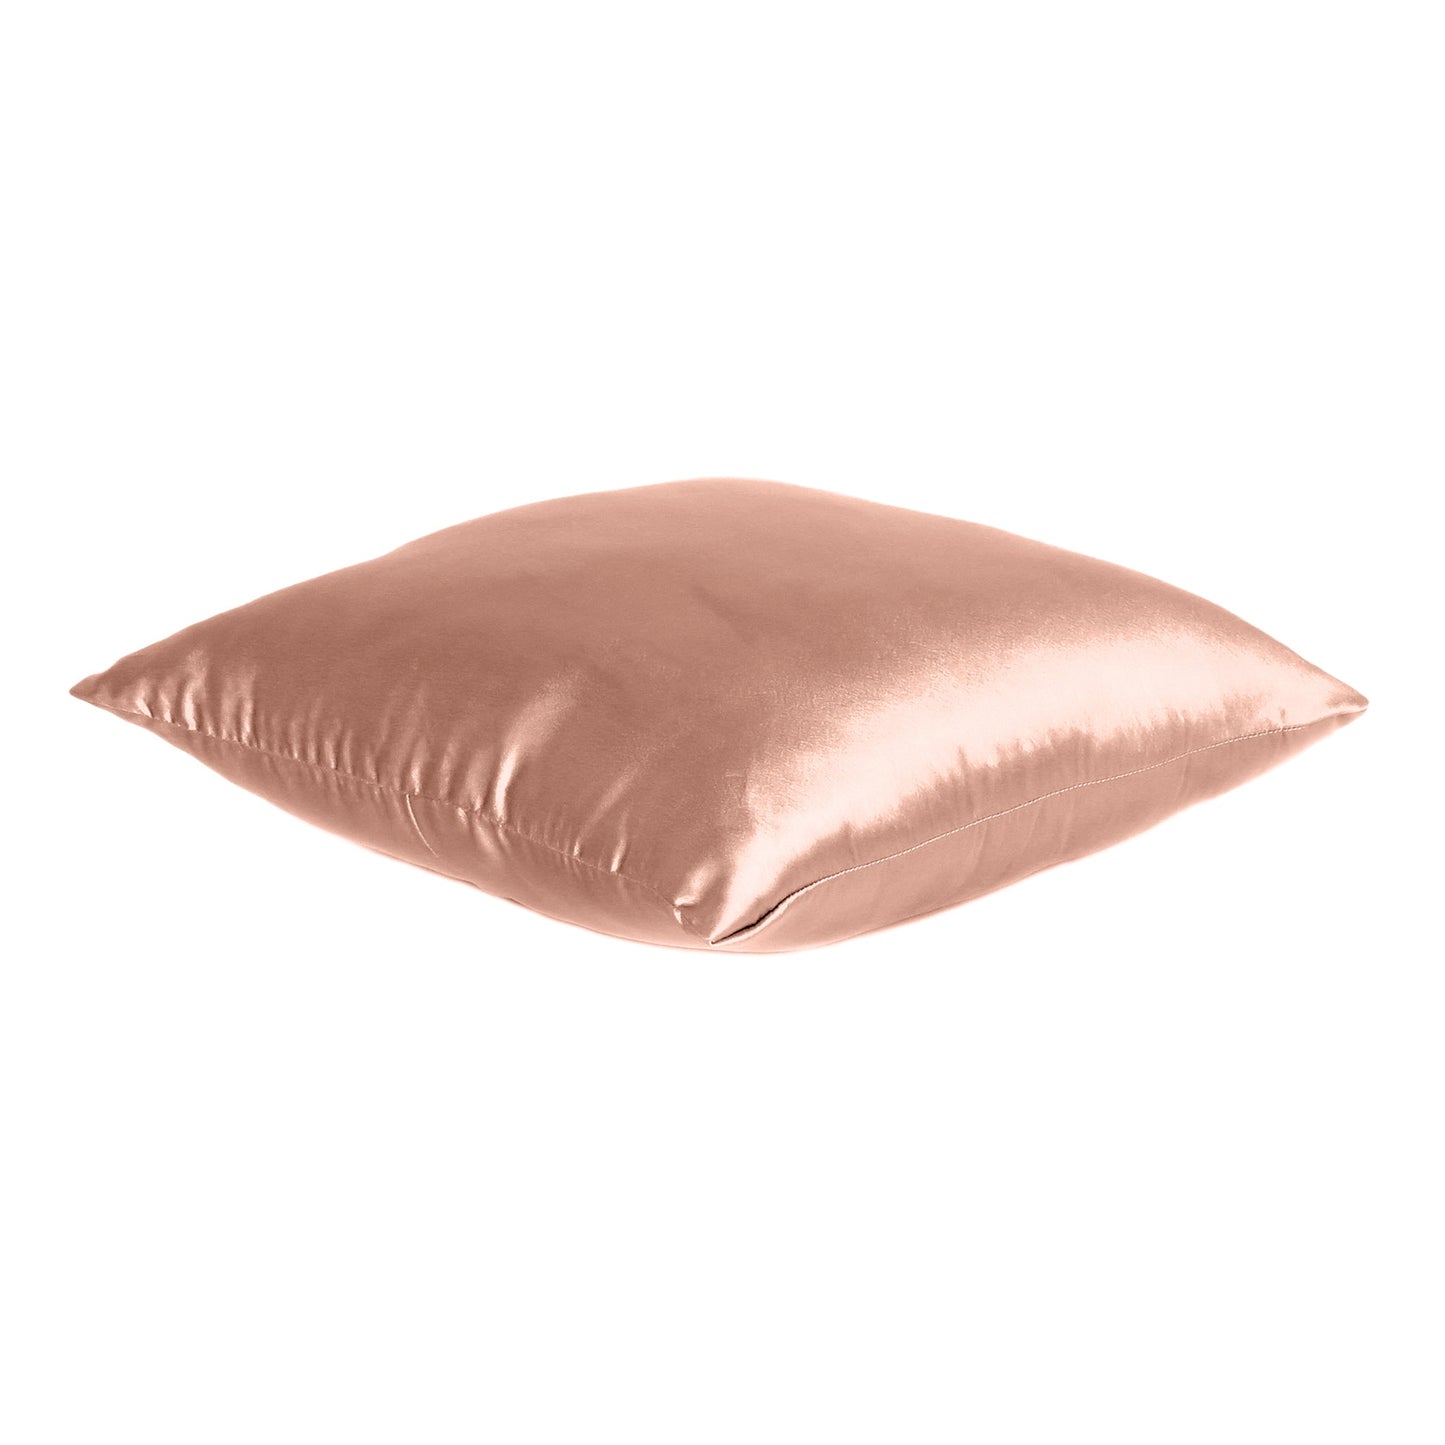 Terracotta Satin Silky Cushion Covers in Set of 2